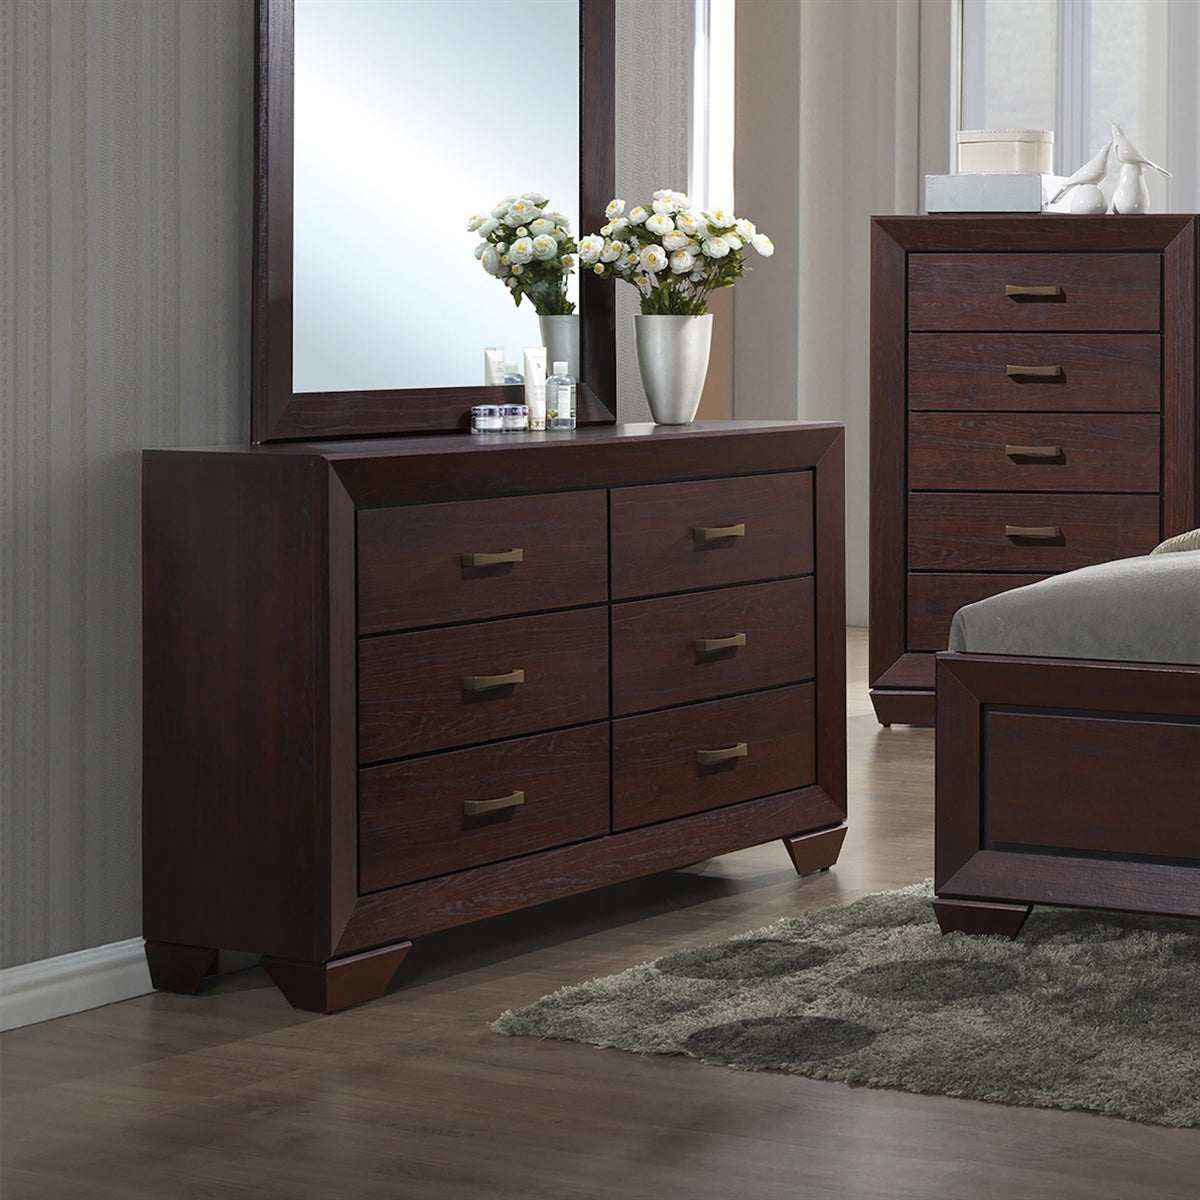 Holt Contemporary Dark Cocoa Finish Queen Panel Bed